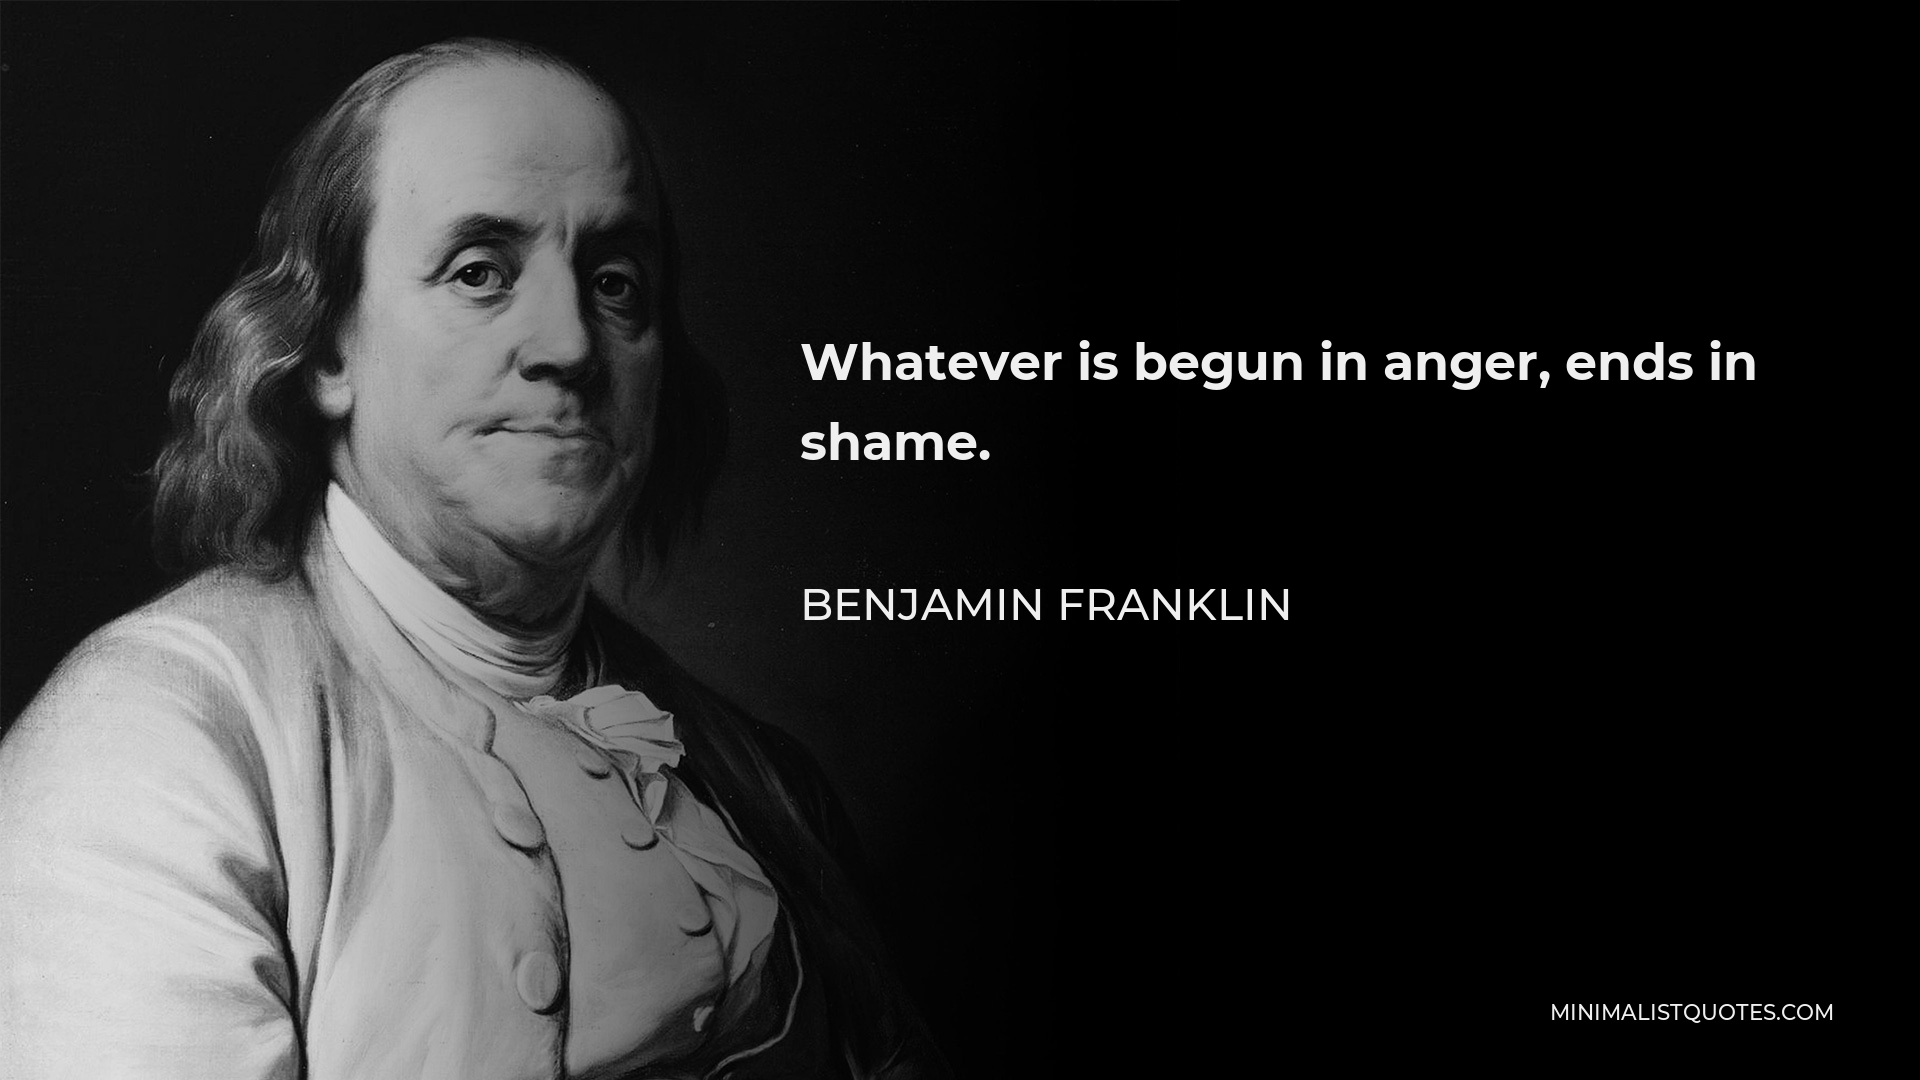 Benjamin Franklin Quote - Whatever is begun in anger, ends in shame.